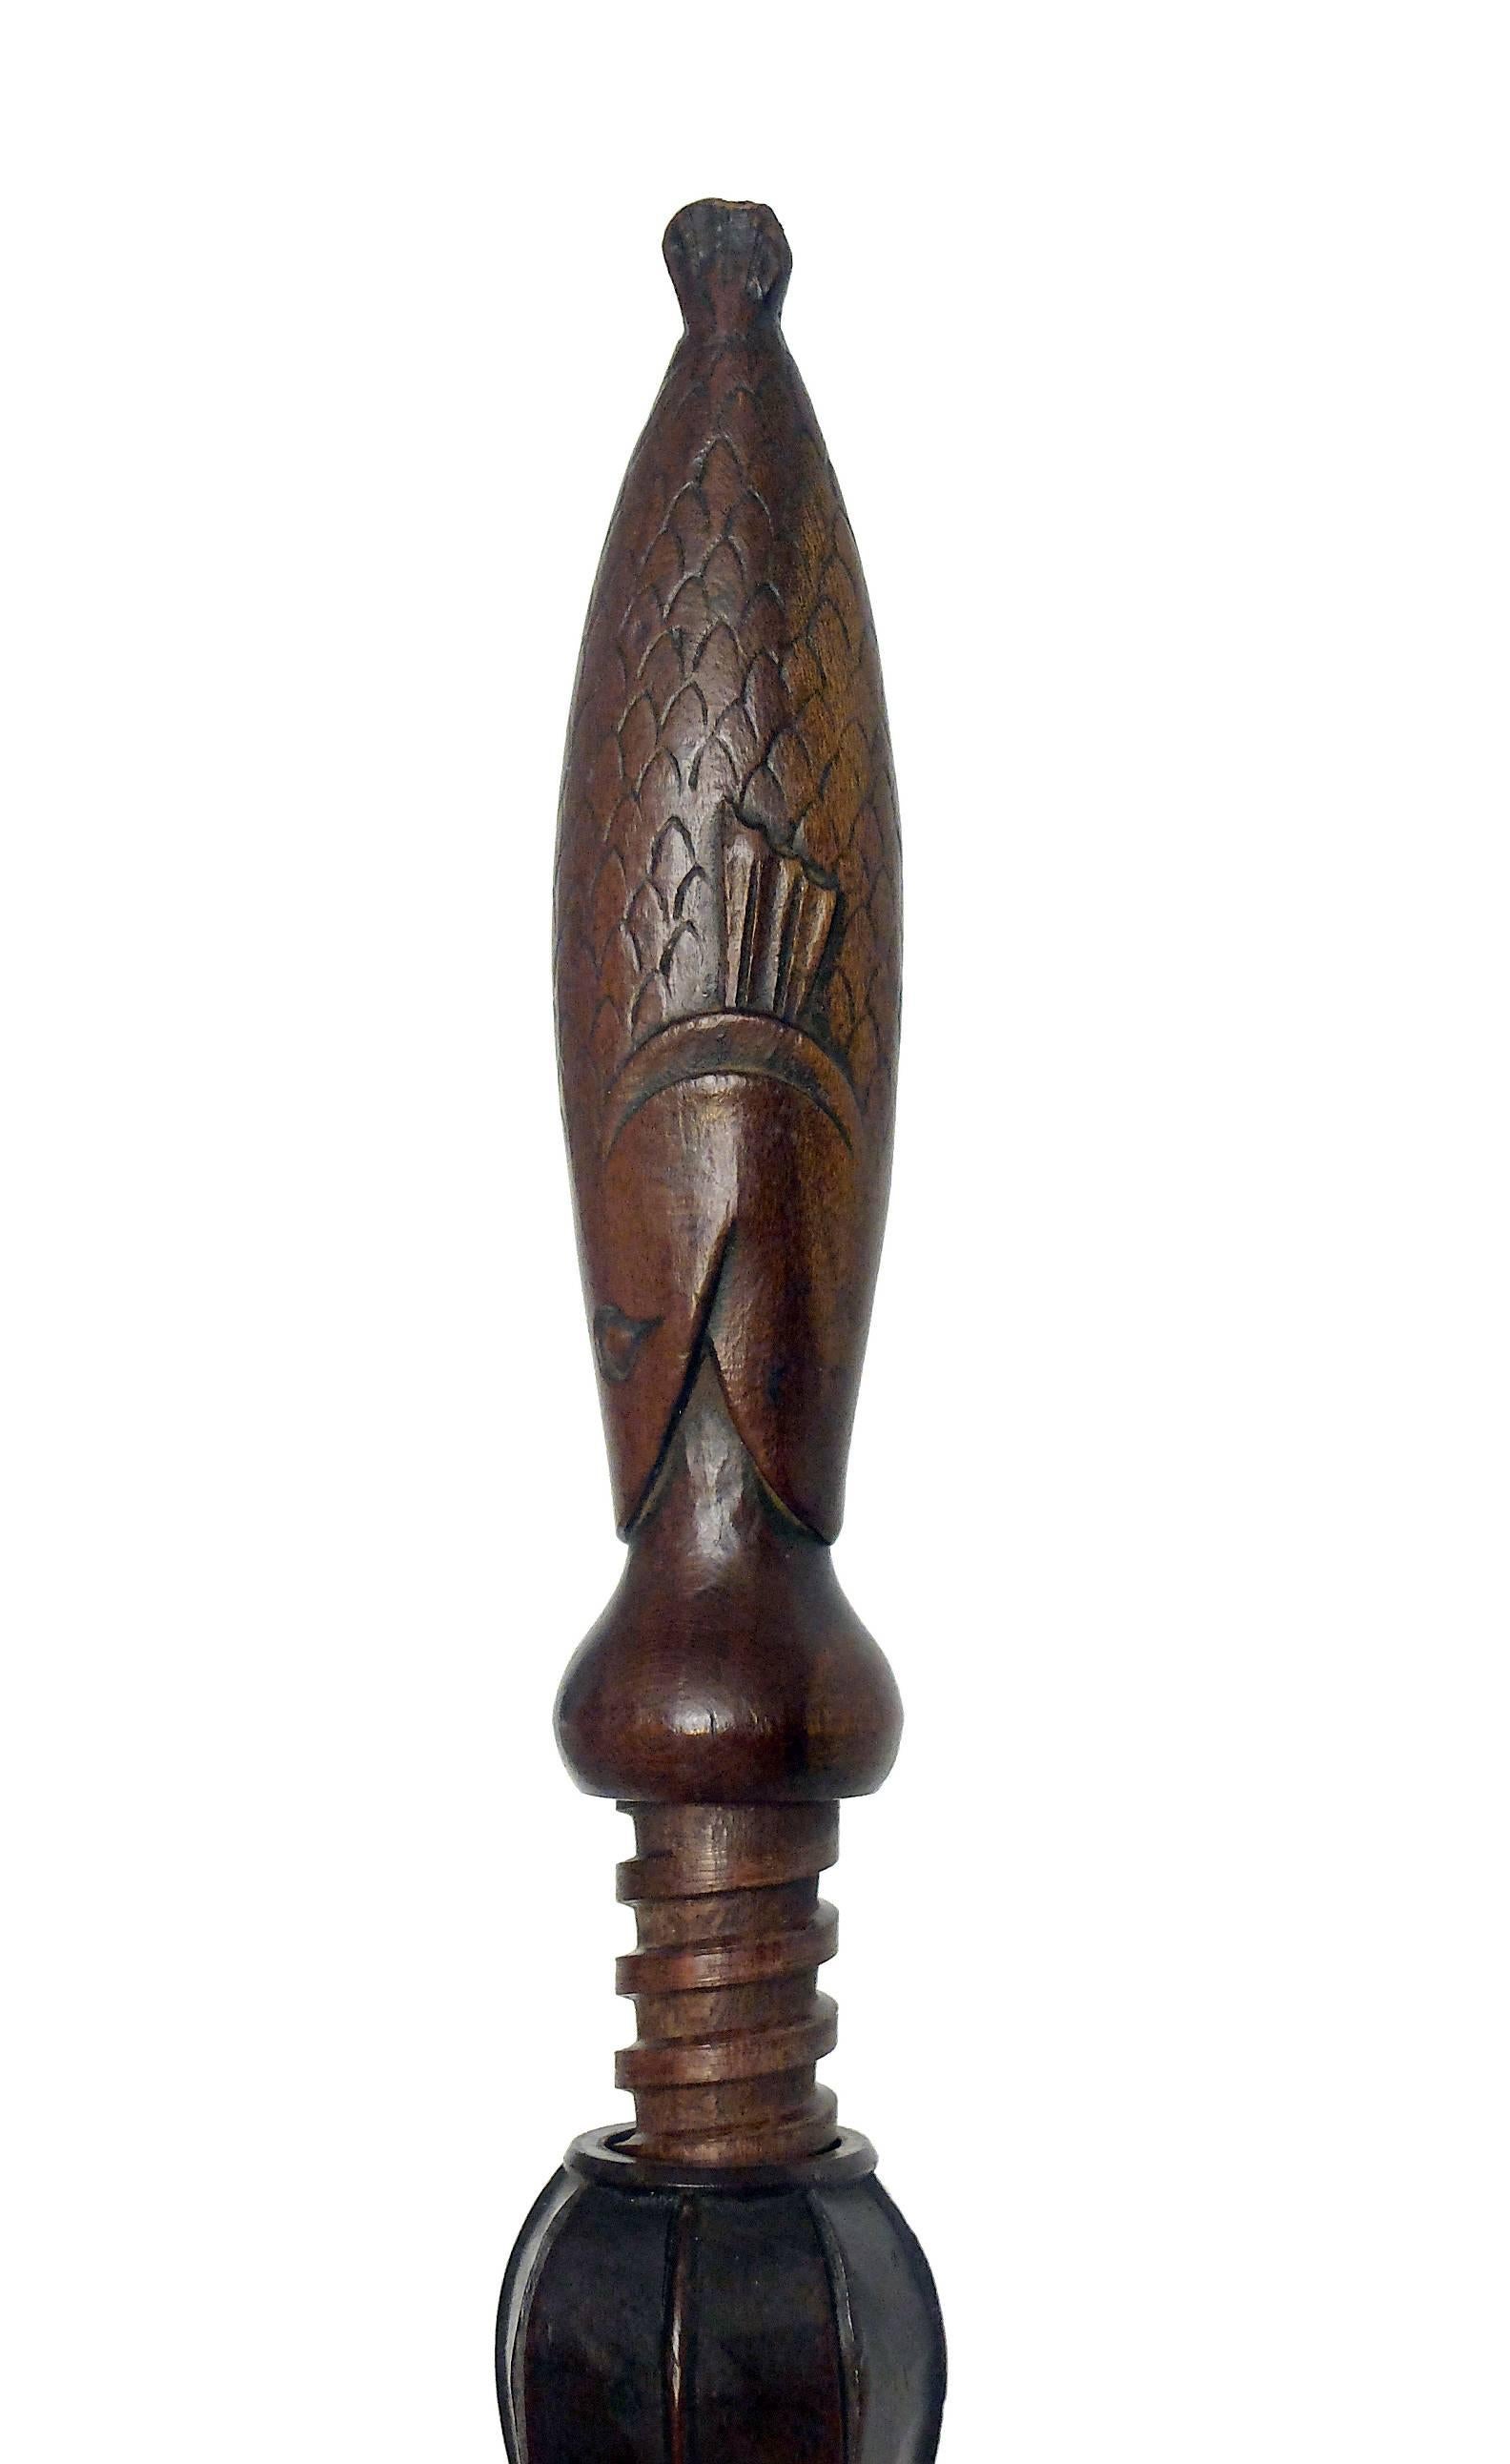 Made out of hazel wood, the nutcracker simply depicts a screaming man’s head. The handle depict a fish. The subject is really unusual, the quality of sculpting, carving and cure of each detail is excellent.